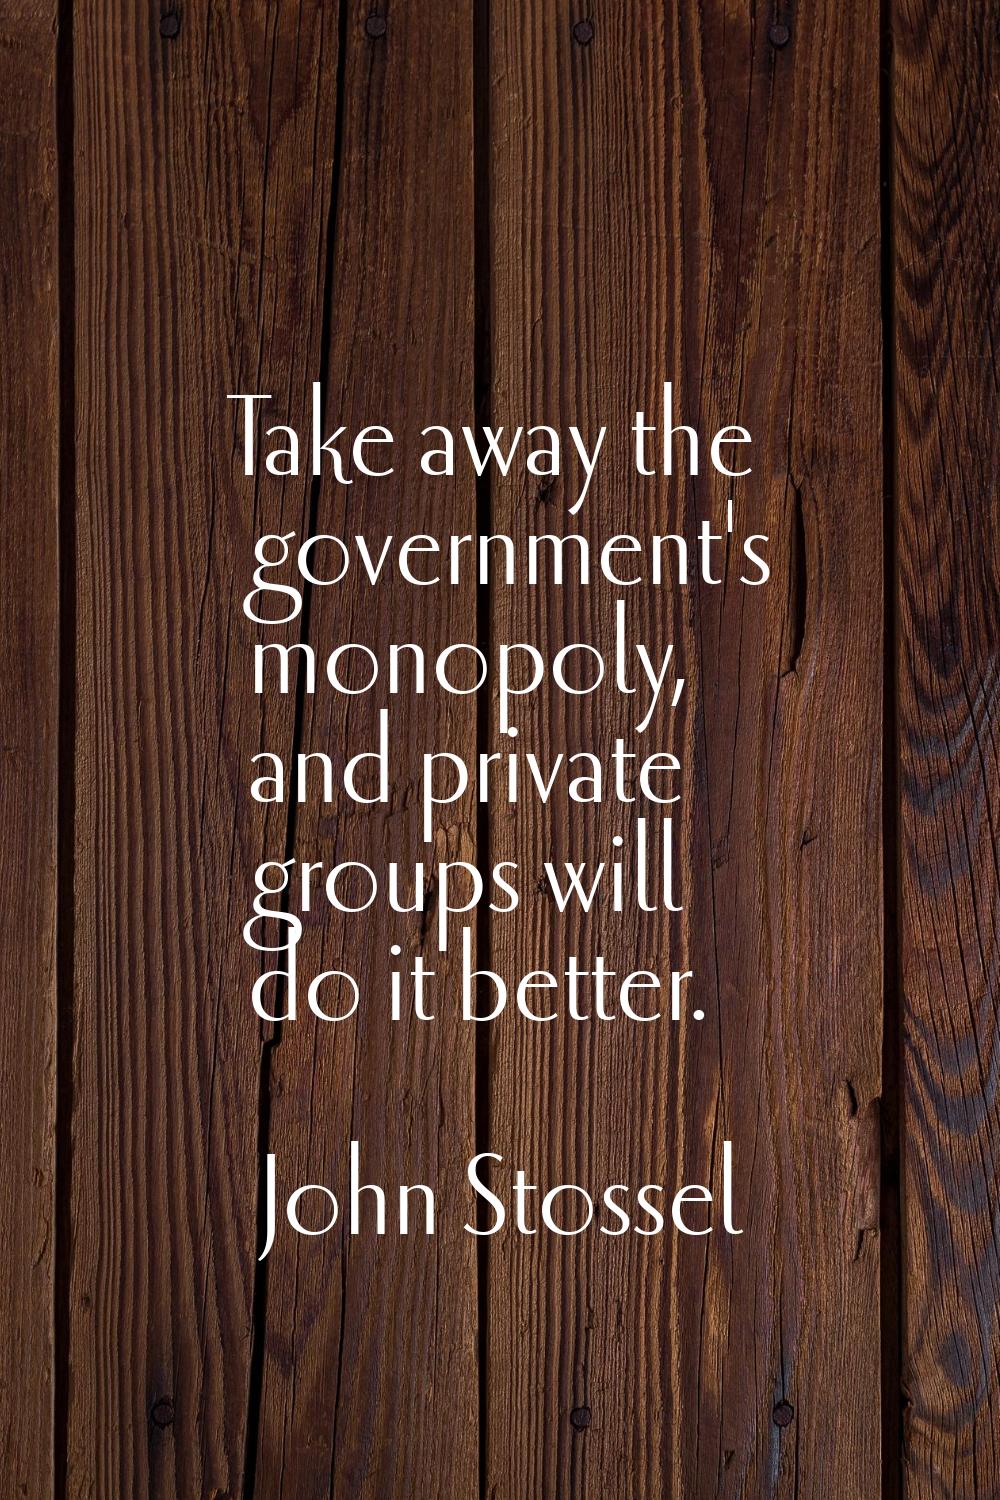 Take away the government's monopoly, and private groups will do it better.